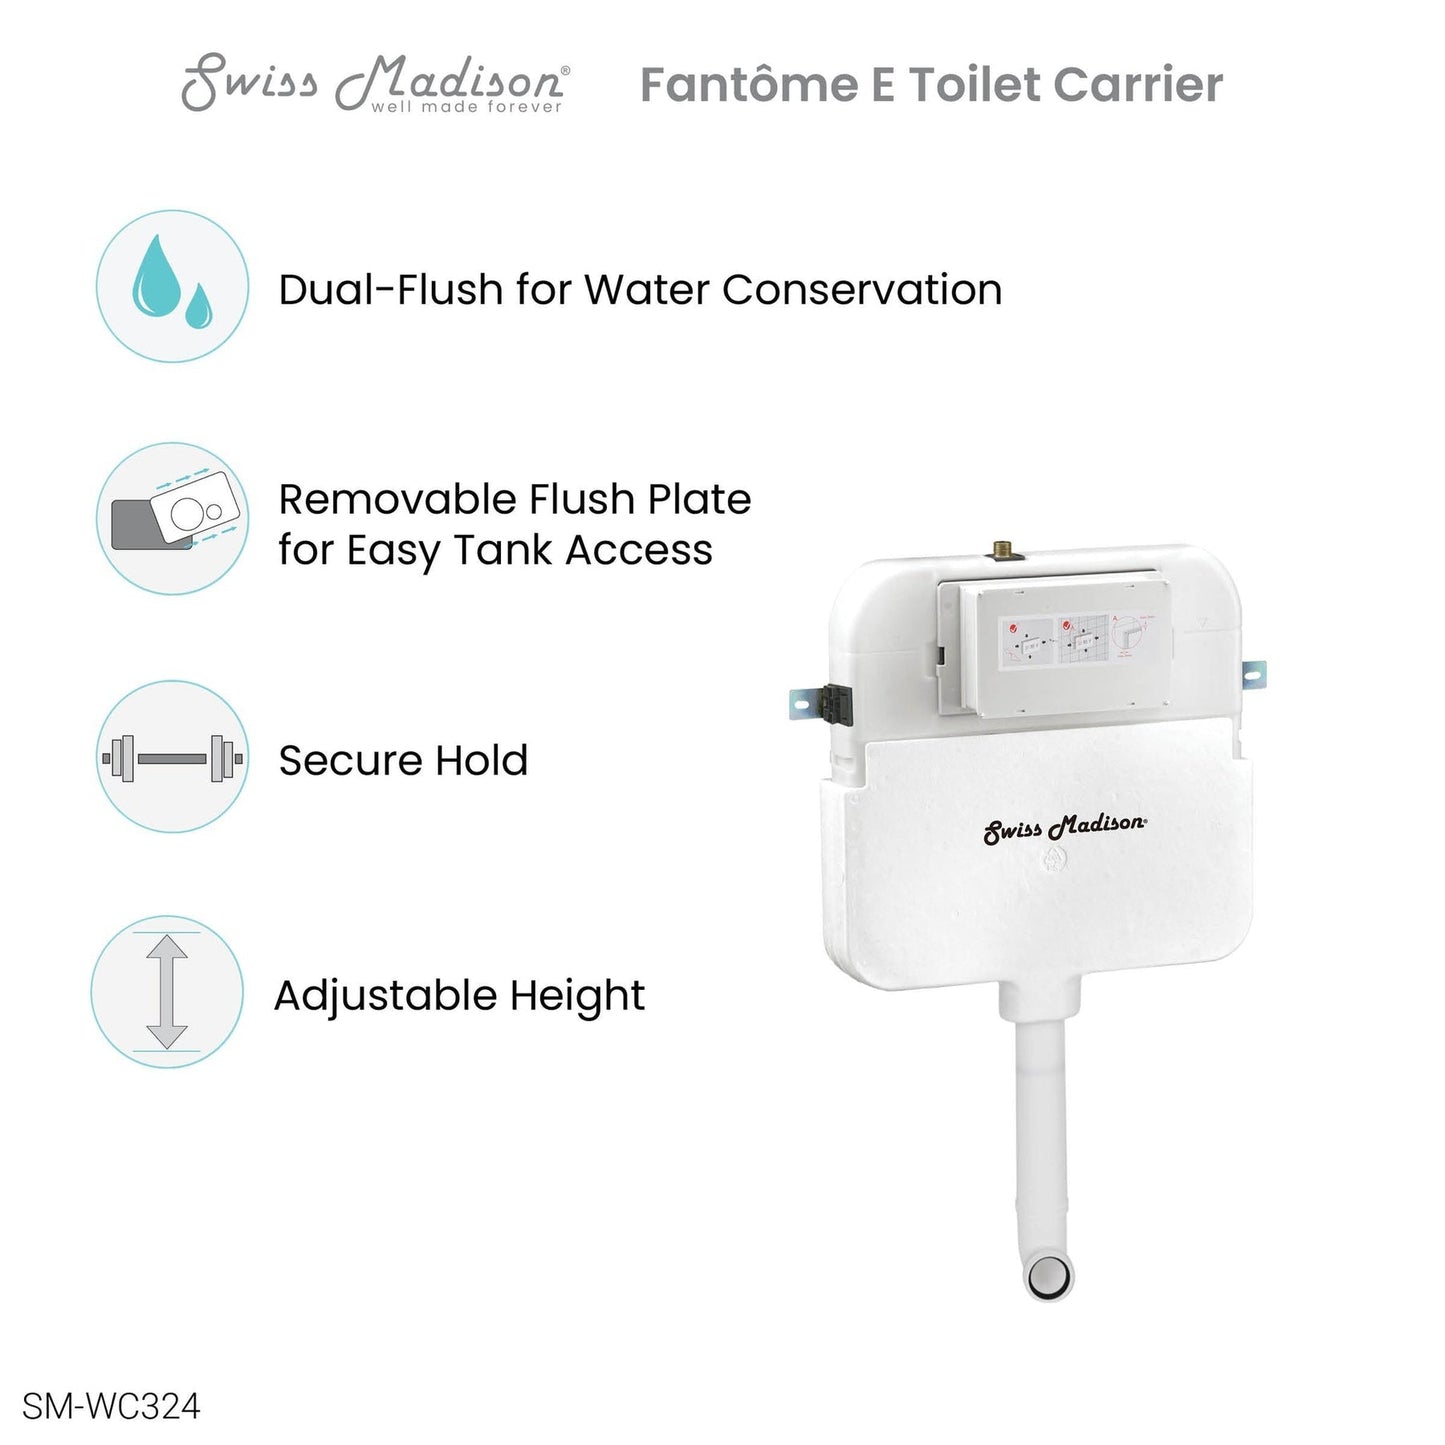 Swiss Madison Fantôme E 2x4 White Steel Frame Insulated In-Wall Toilet Tank Carrier System For Back-to-Wall Toilet